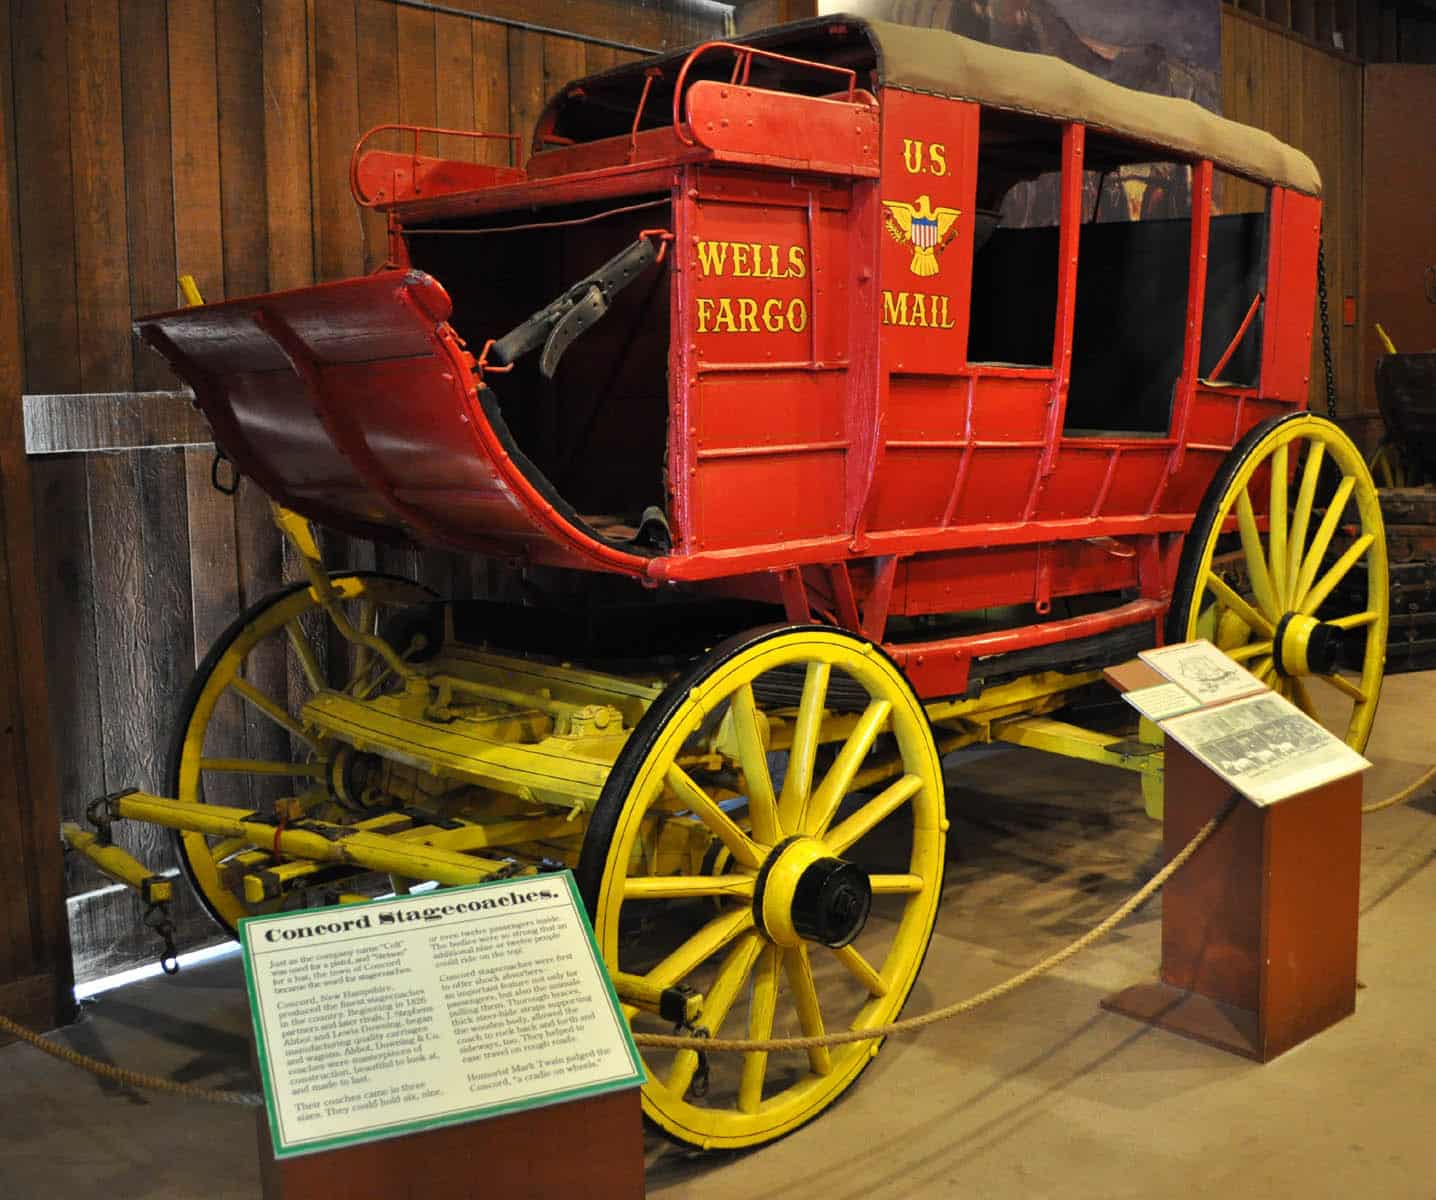 Just A Car Guy: this is a stagecoach museum in San Diego